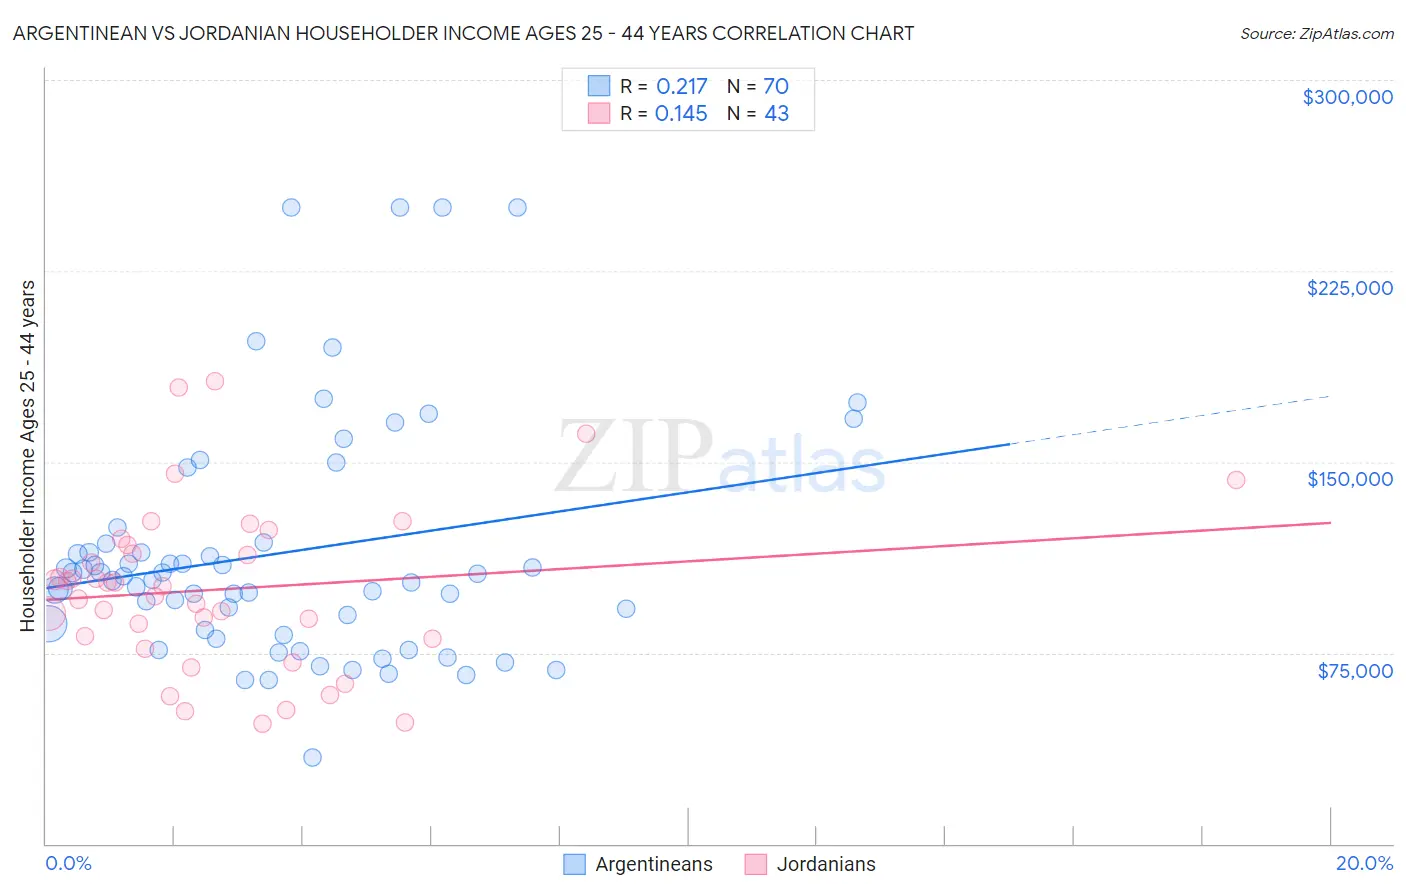 Argentinean vs Jordanian Householder Income Ages 25 - 44 years